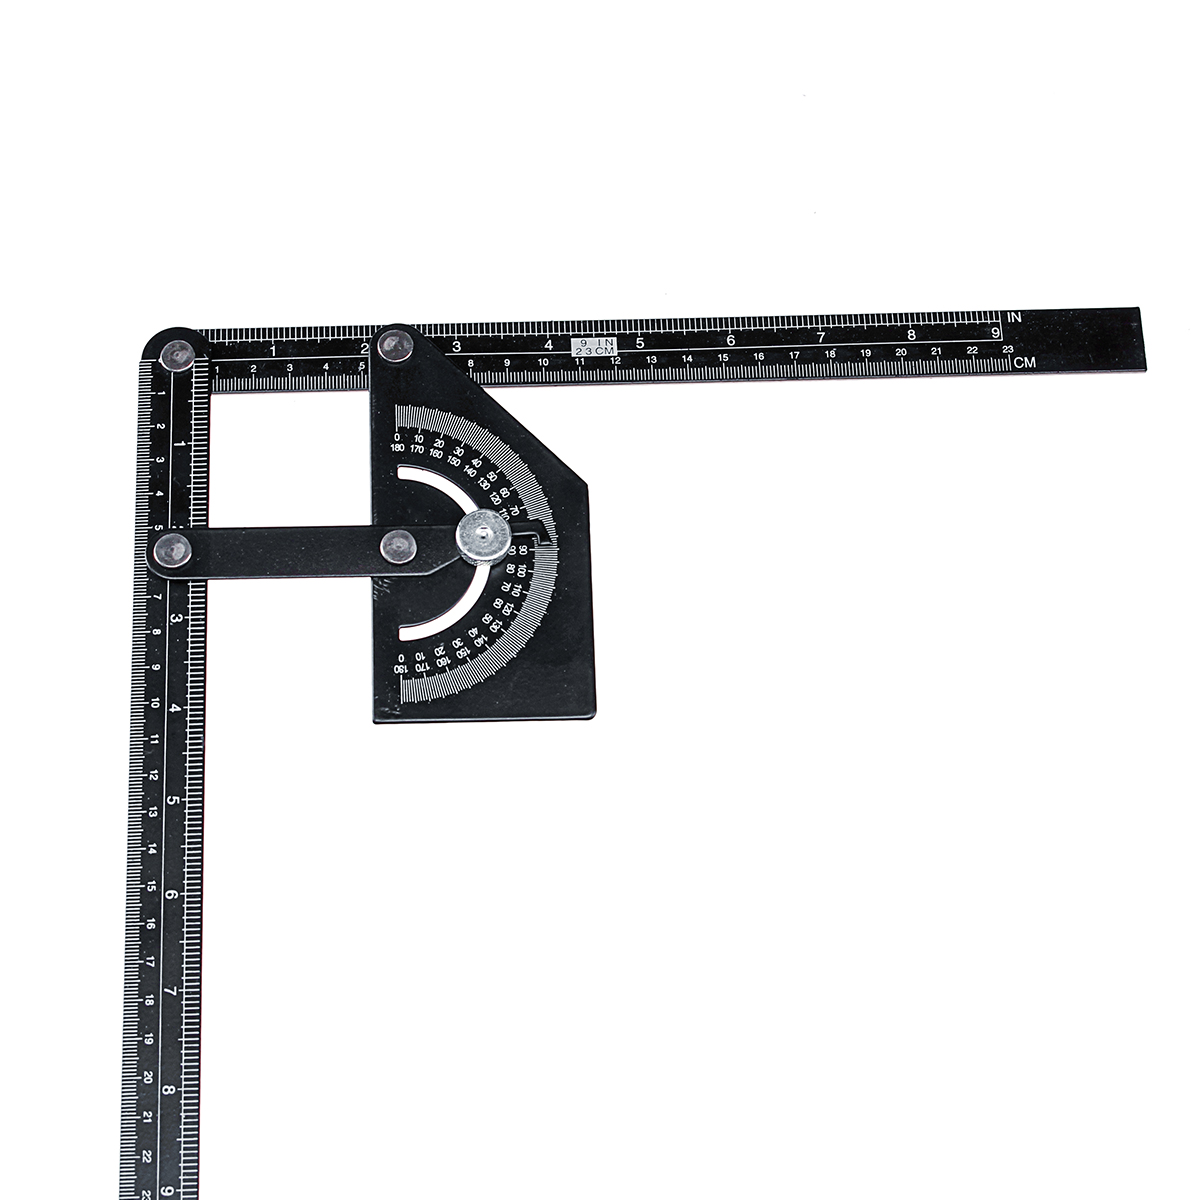 Angle-Ruler-Angle-Protractor-Stainless-Steel-180deg-Angle-Finder-Measure-Ruler-Gauge-Tool-230x500mm-1332790-8